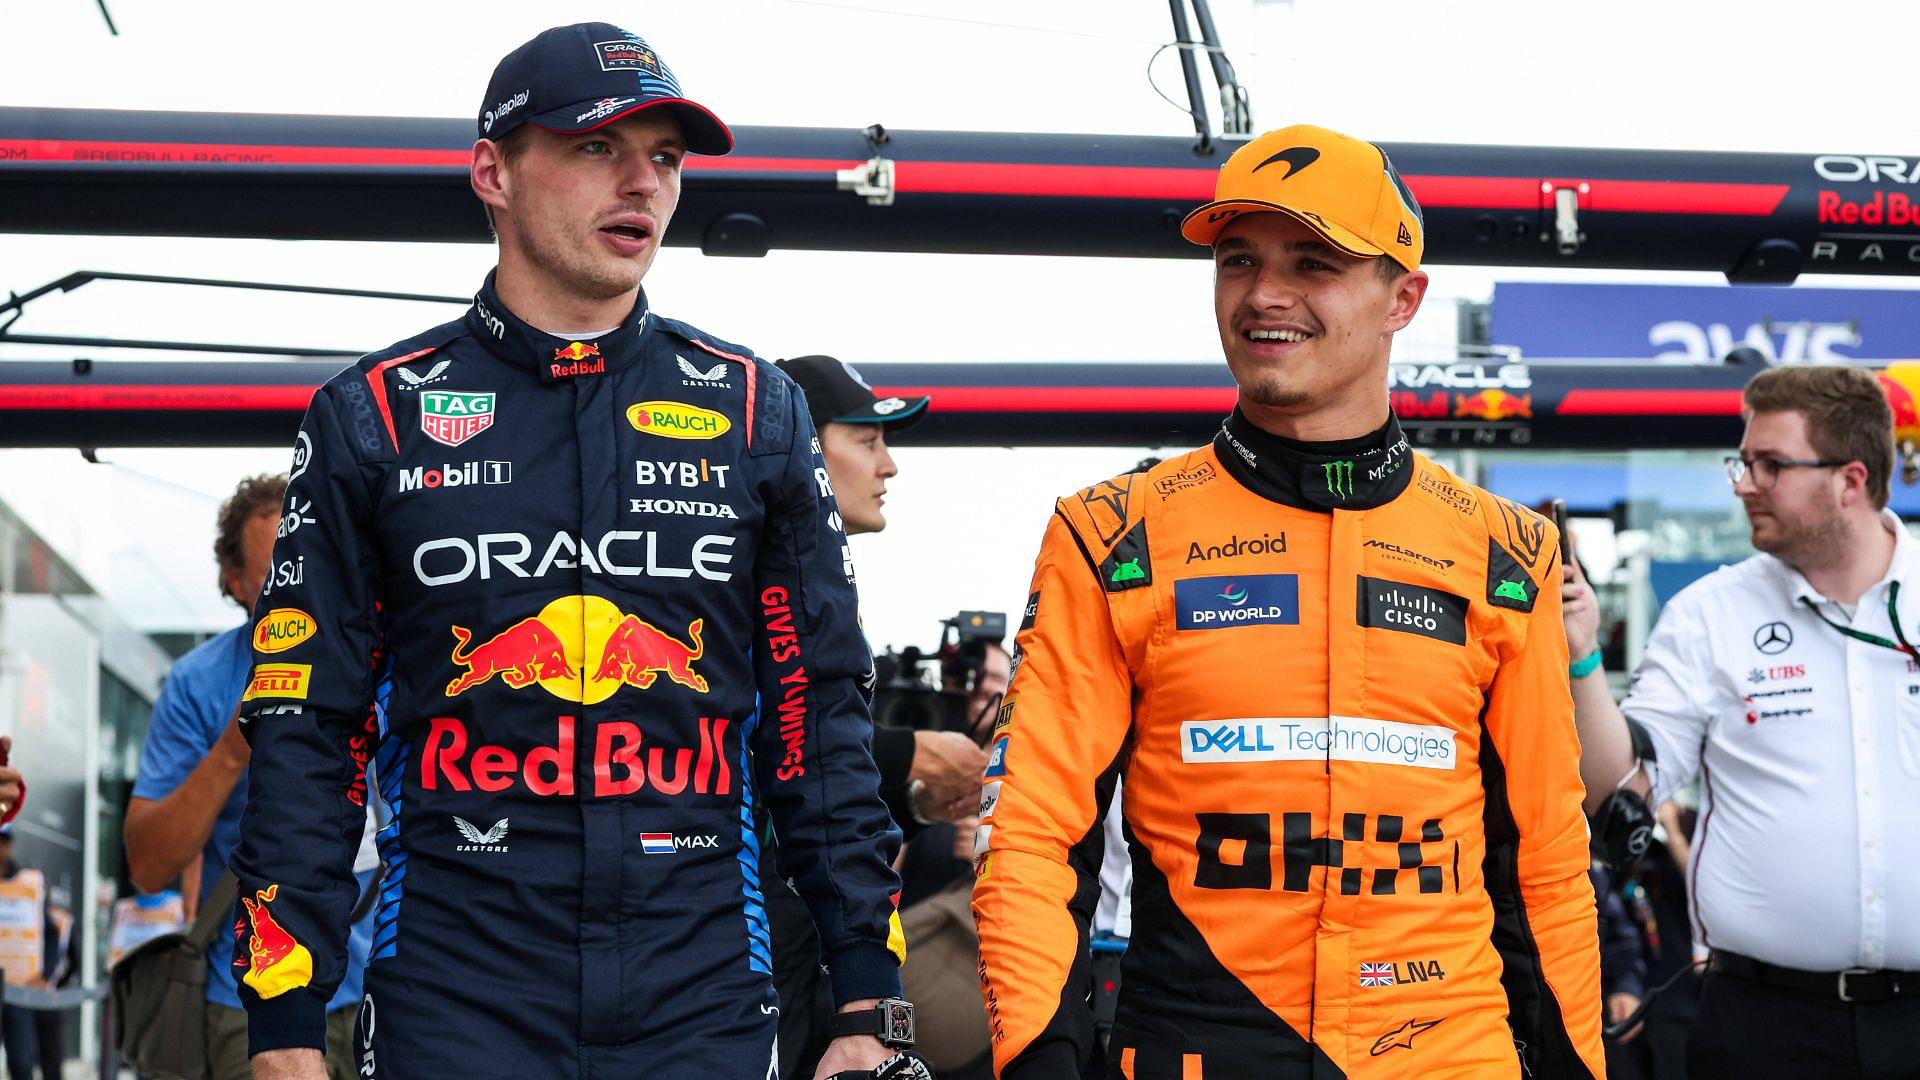 Lando Norris Would Not Want to Be Max Verstappen Even If That Meant Front Row At Canadian GP